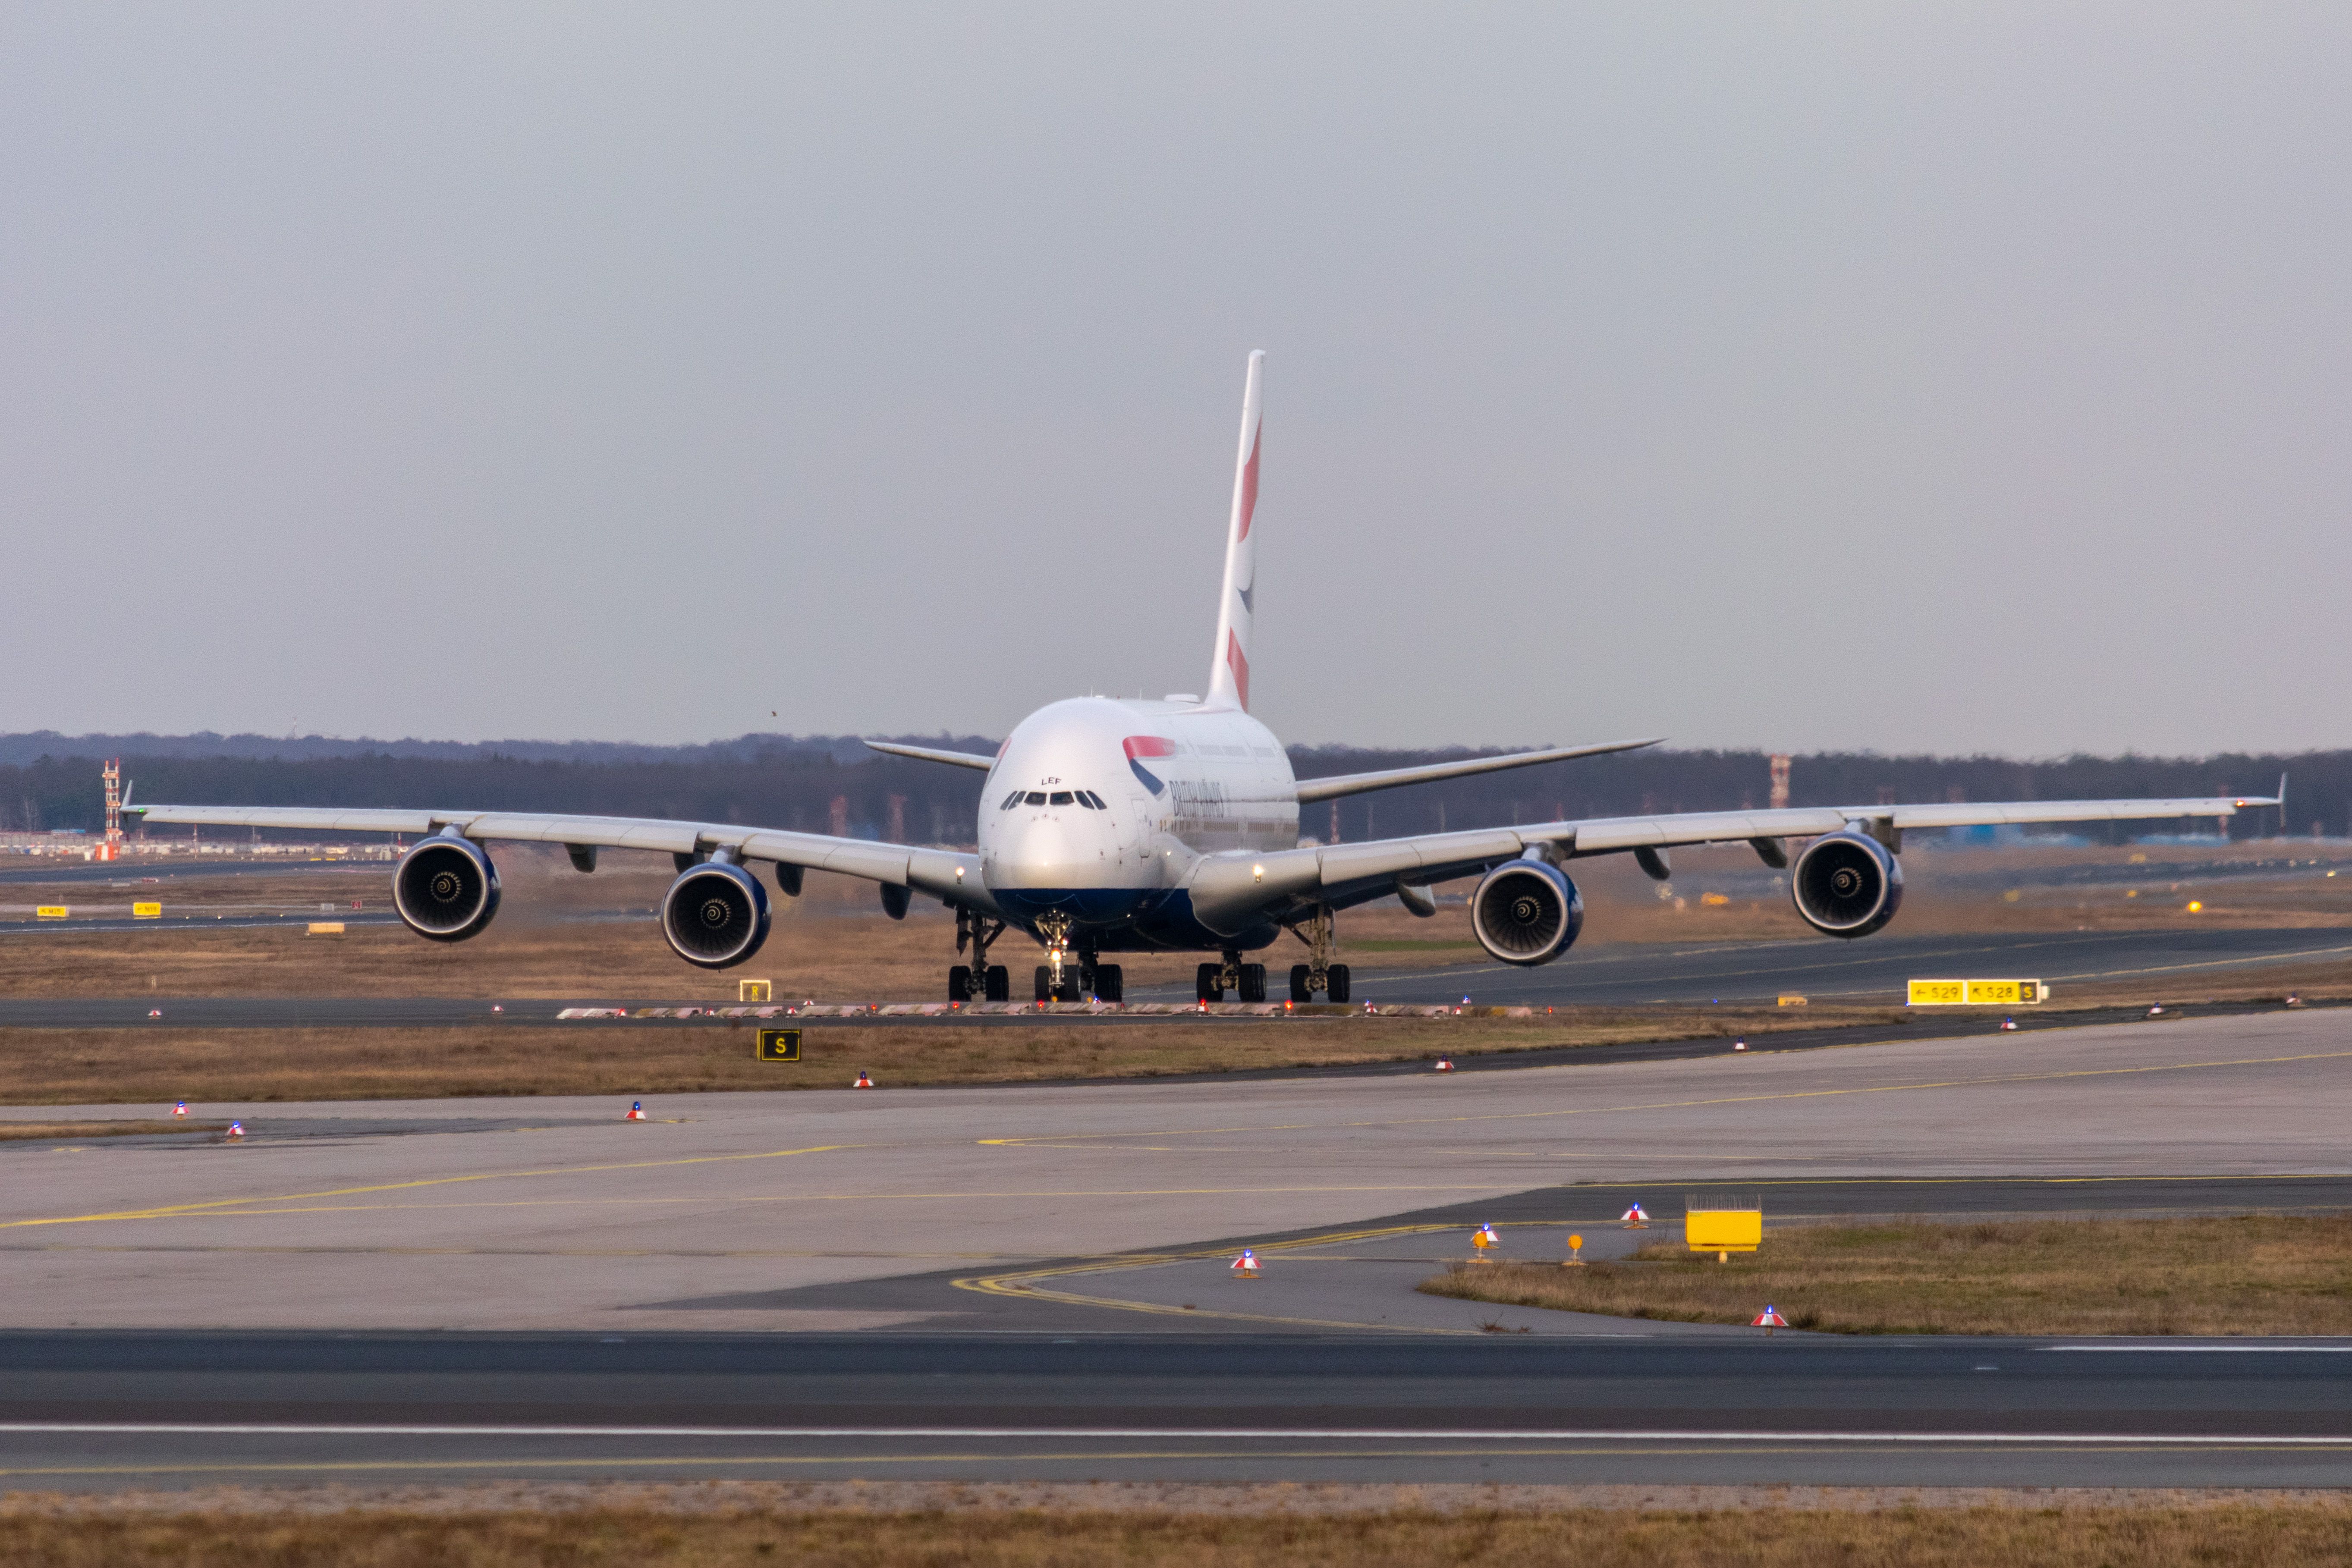 British Airways A380 during taxi